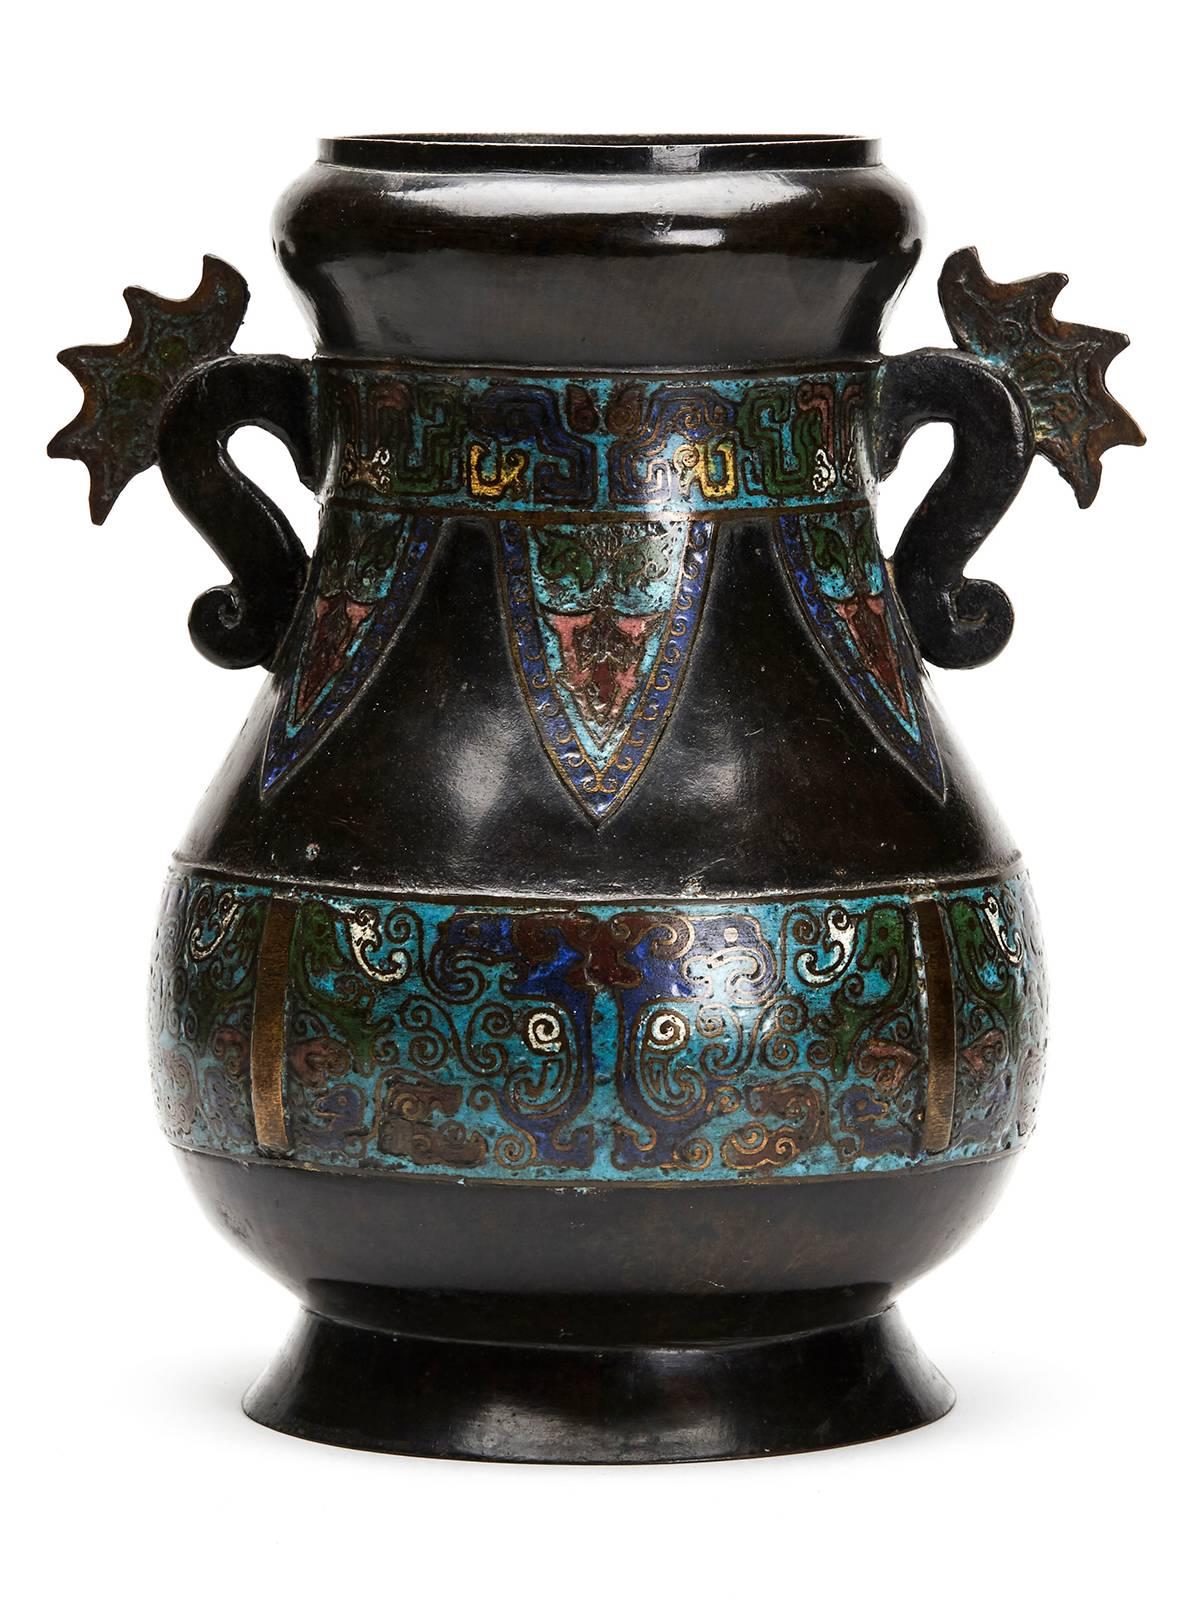 A large and impressive antique Chinese archaic form twin handled bronze vase with cloisonne enamel designs in Champleve style. The rounded bulbous vase has a wonderful dark patina with flat snake like handles and set with bands of inlaid colored